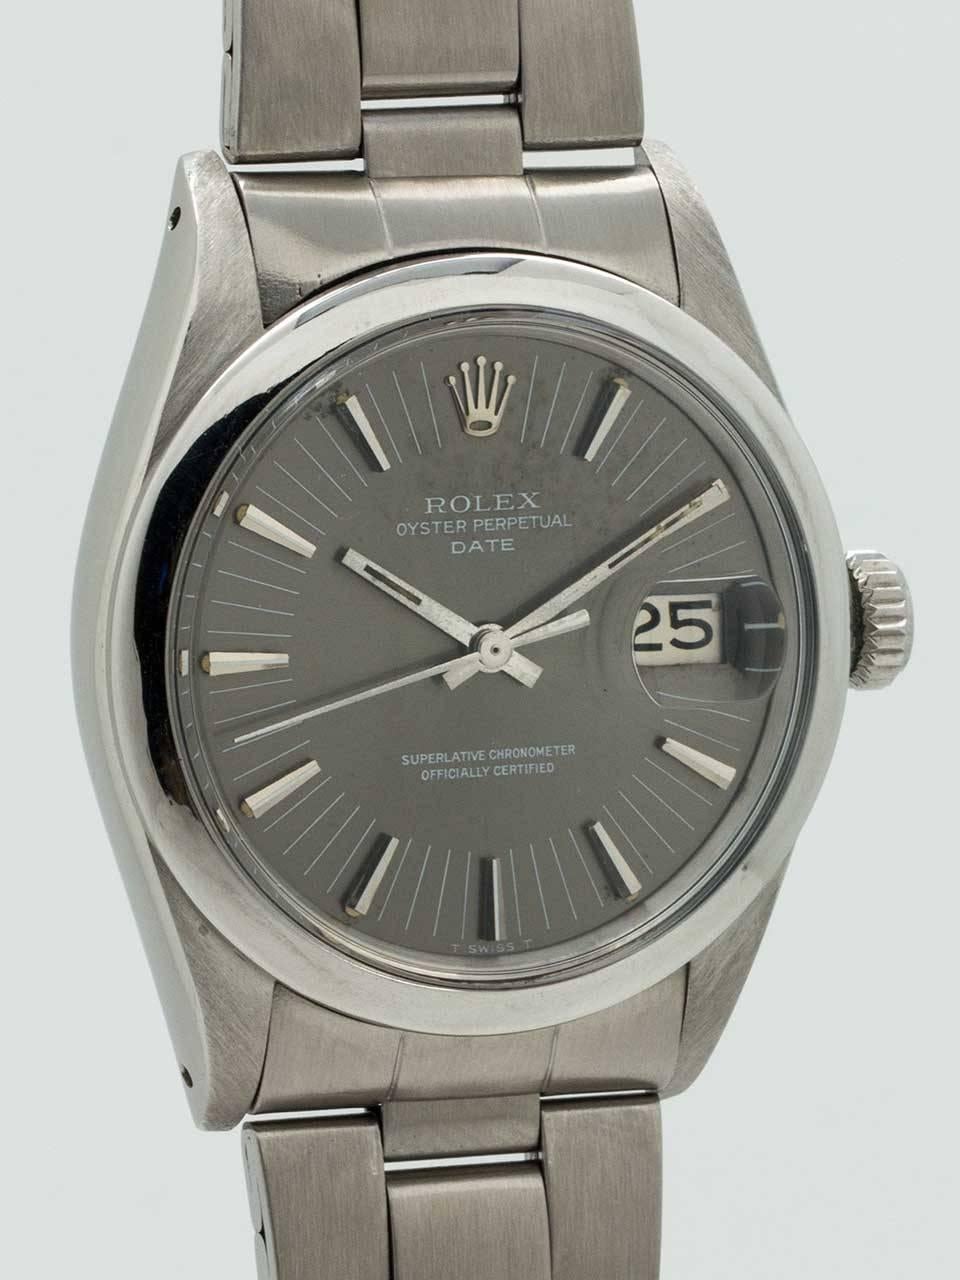 Rolex Oyster Perpetual Date ref 1501 circa 1971. Featuring 34mm diameter stainless steel case with smooth bezel and acrylic crystal. With scarce original gray “radial” dial. Powered by self winding caliber 1570 chronometer rated movement with sweep